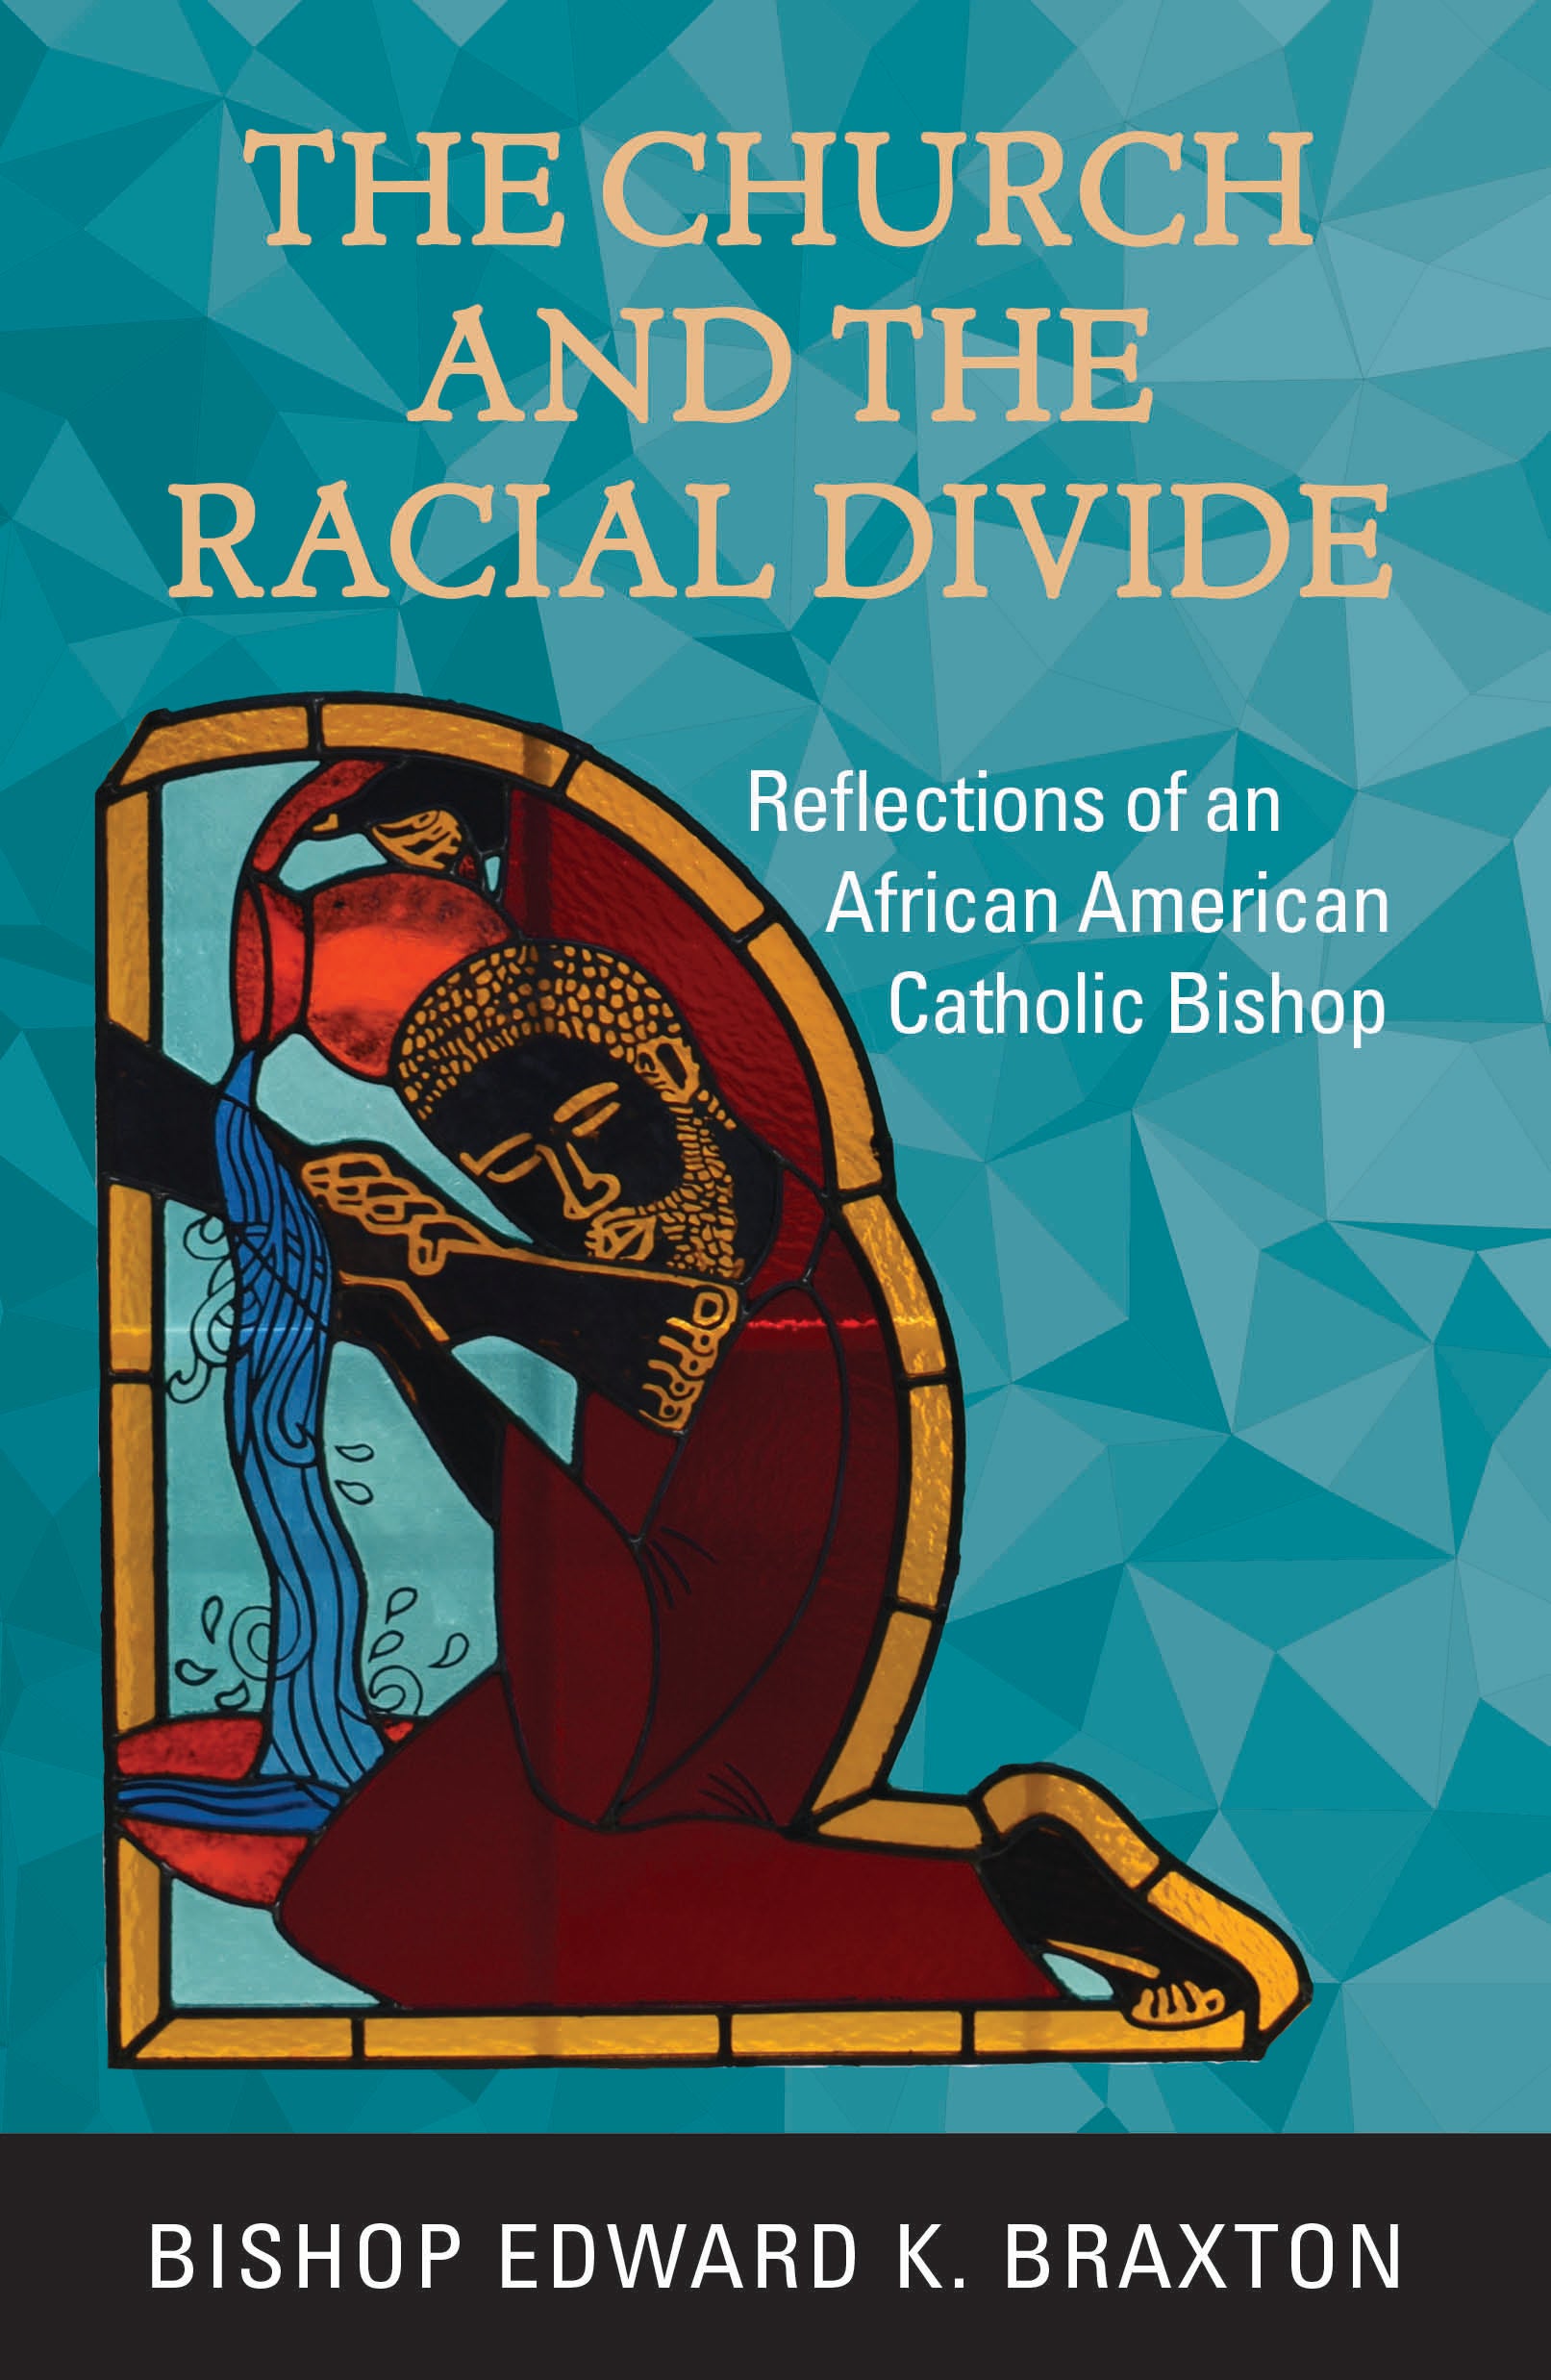 The Church and the Racial Divide: Reflections of an African American Catholic Bishop